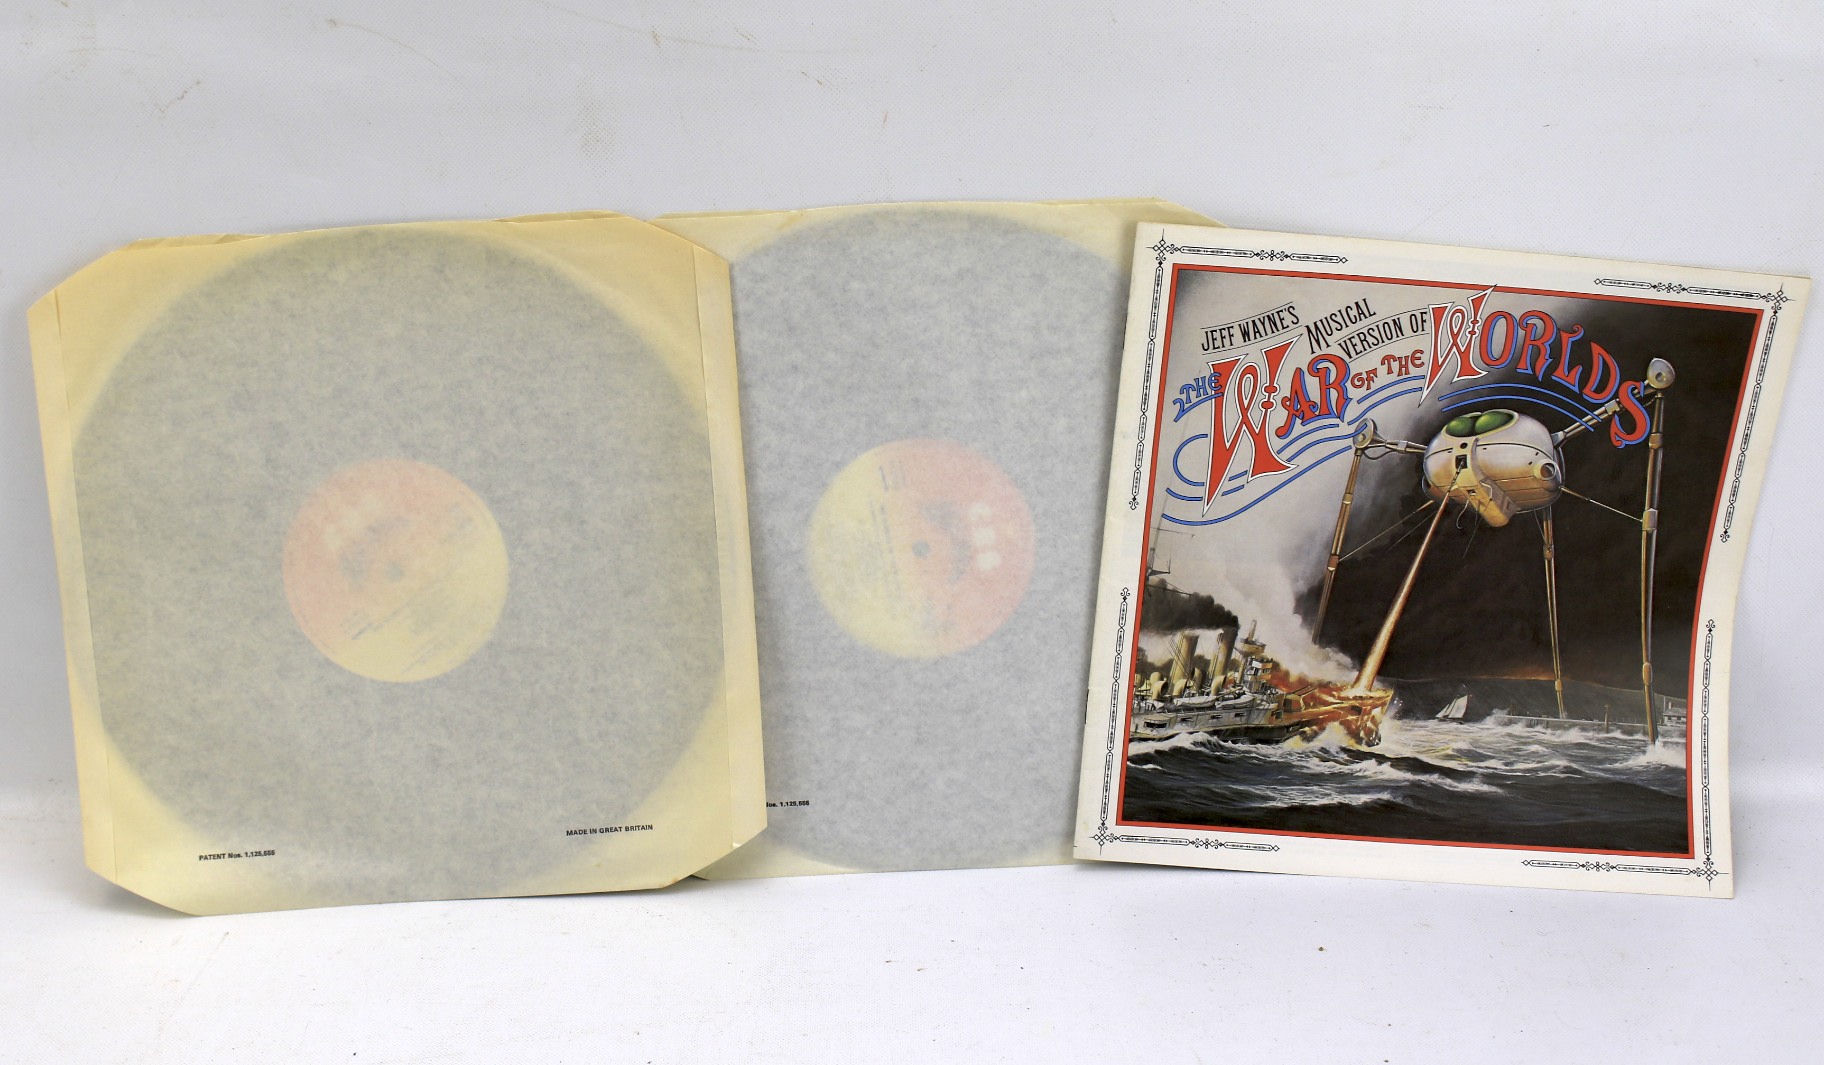 A collection of vinyl albums. - Image 6 of 6